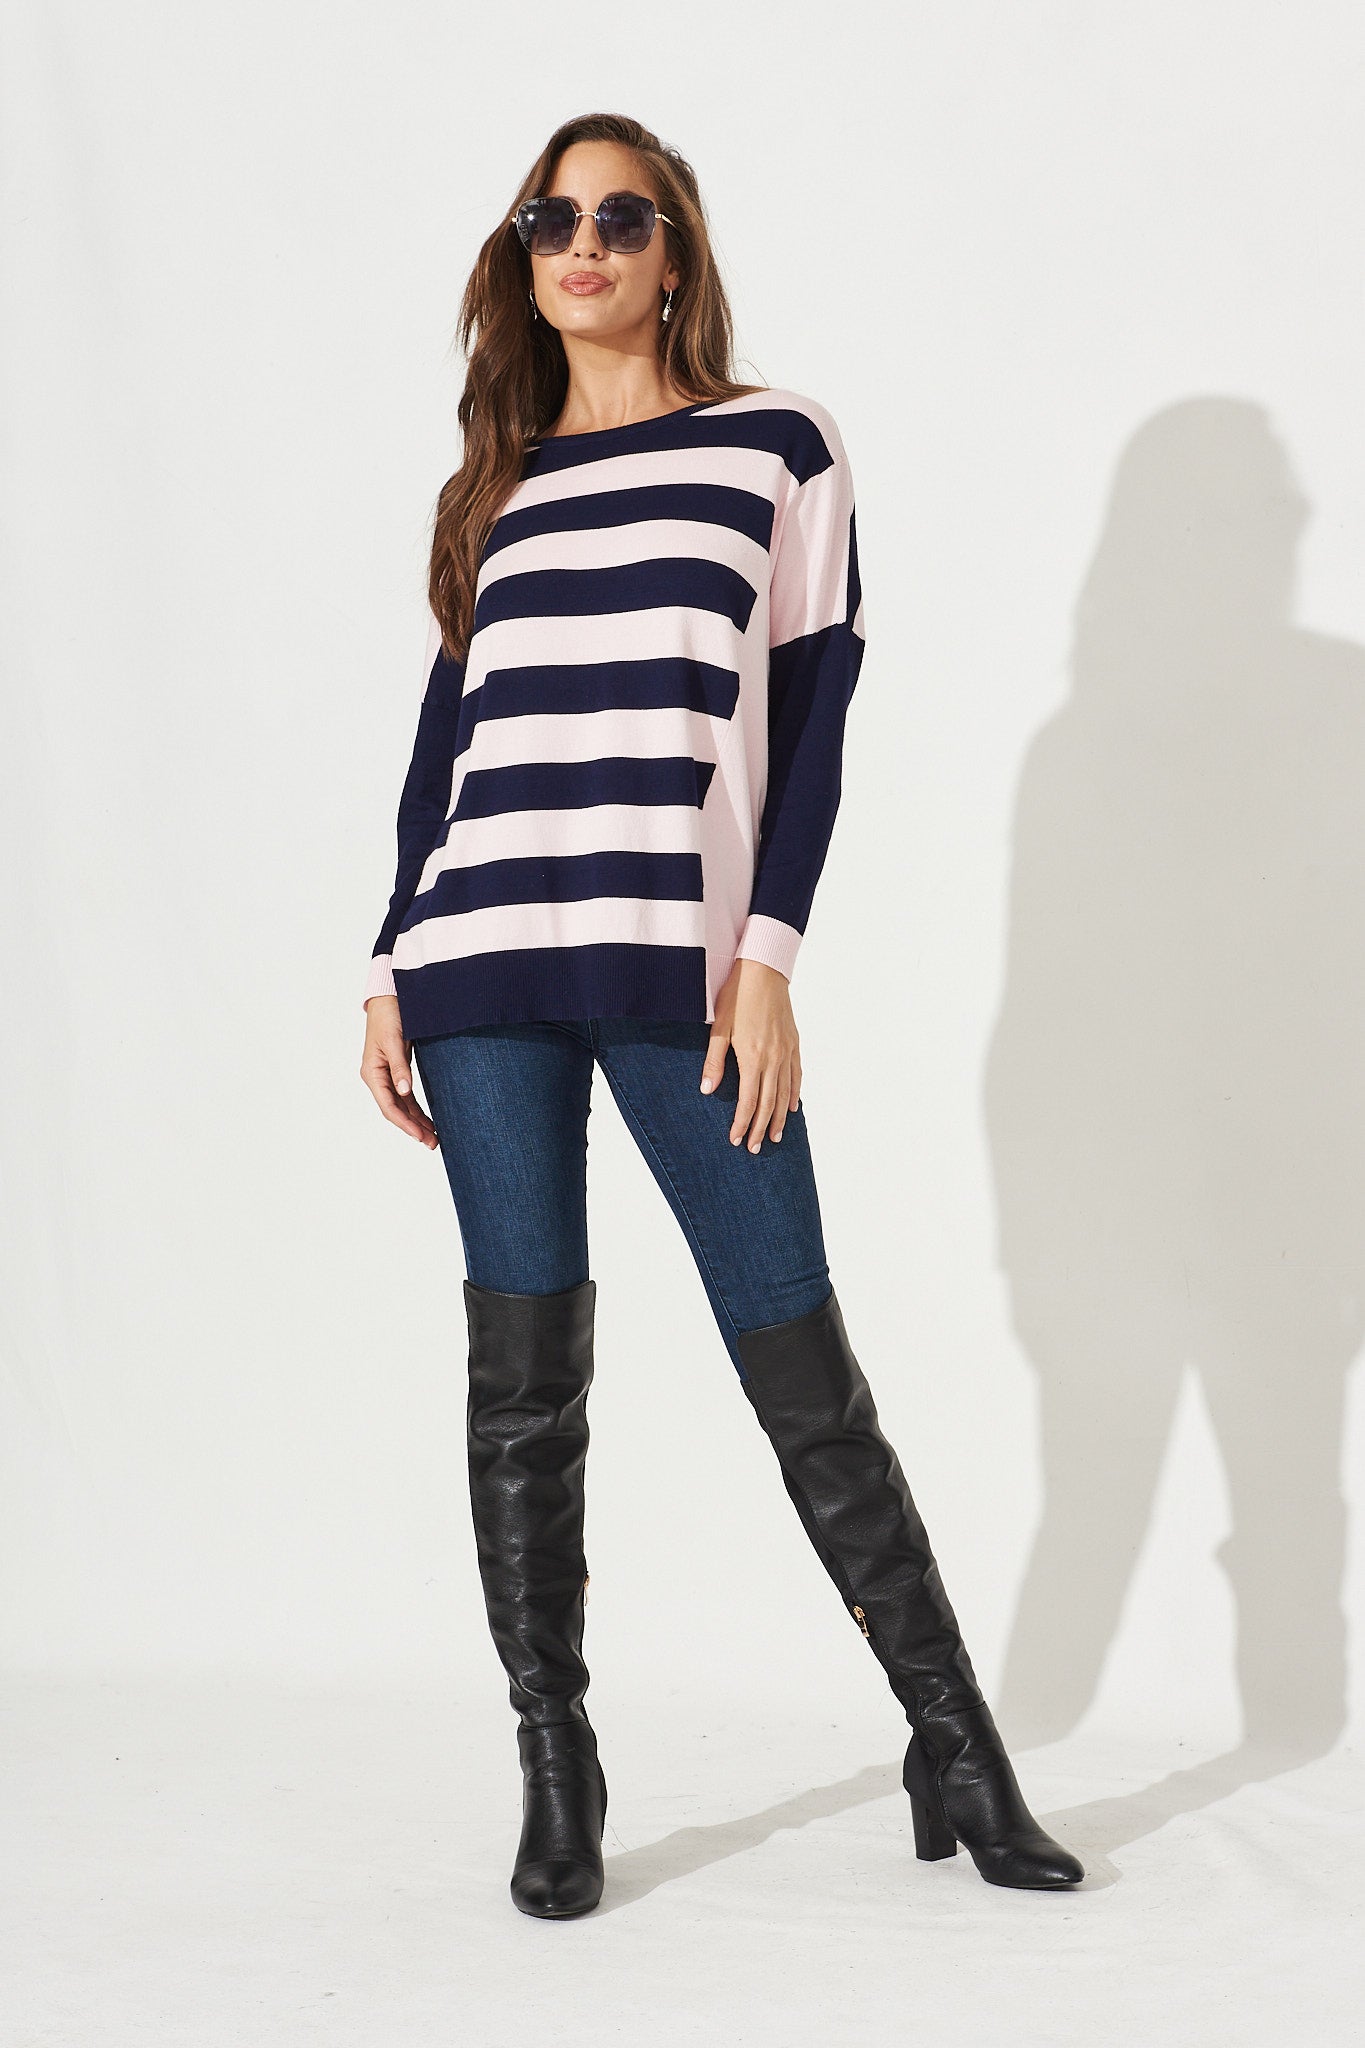 Riviera Knit Top In Navy With Blush Stripe - Full Length